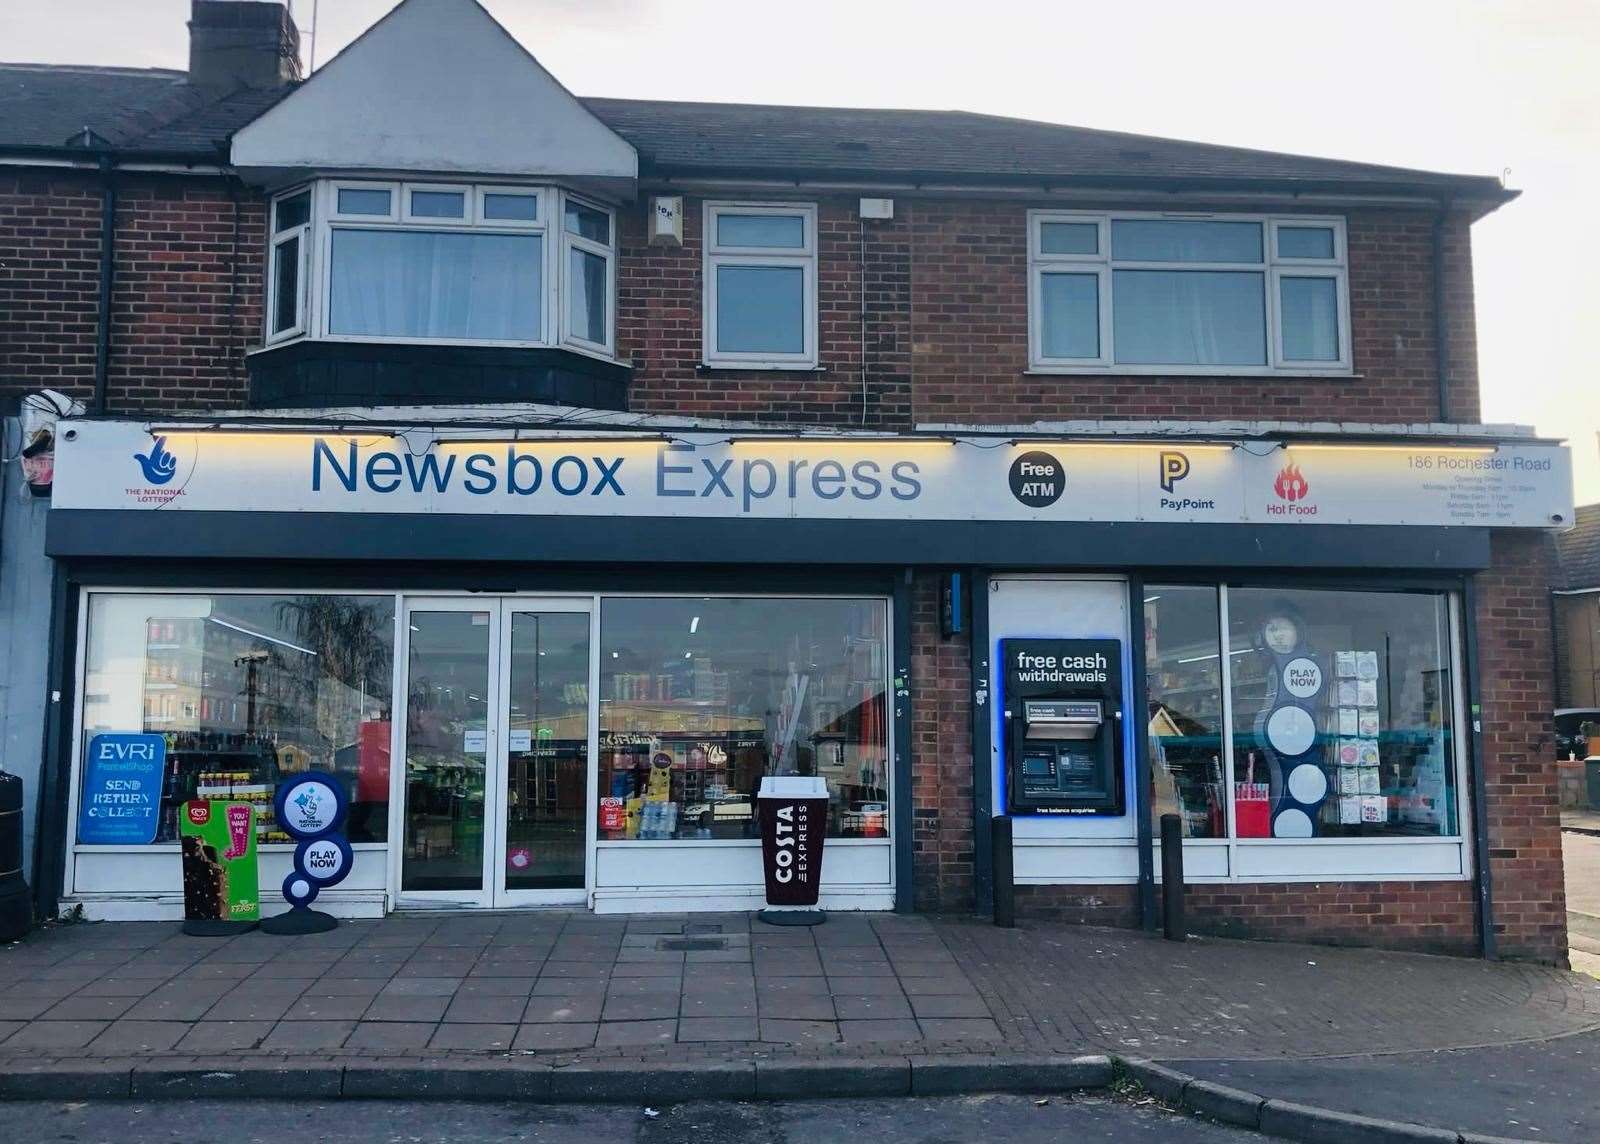 The Newsbox Express in Gravesend. Picture: Chelan Patel